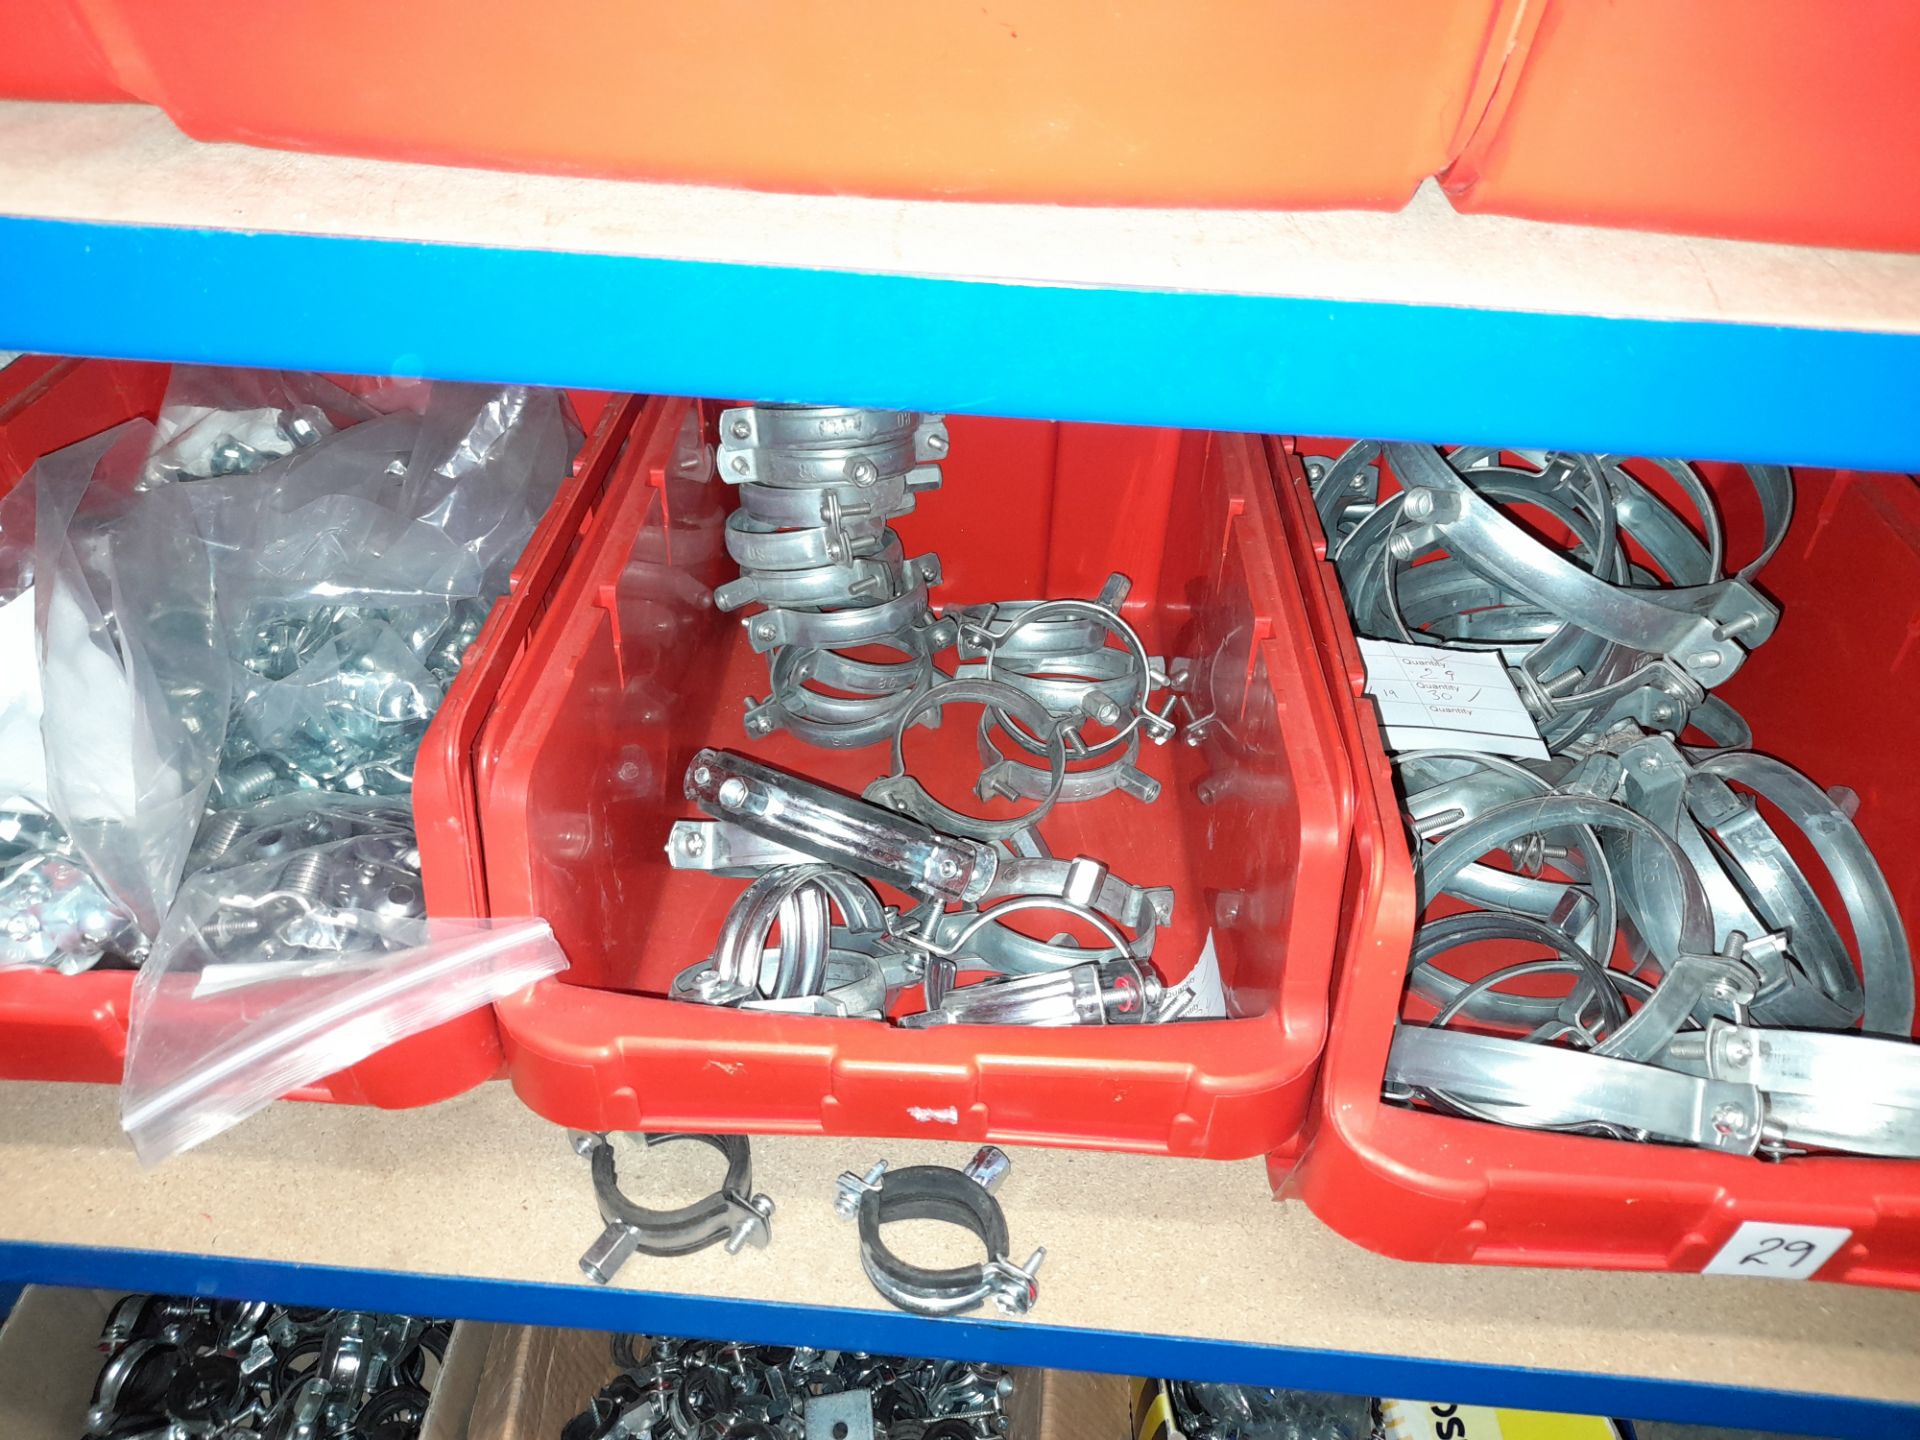 Large Quantity of stock to 13 bays, bolts, nuts, clamps, bracketry, fittings, washers, plastic - Image 9 of 41